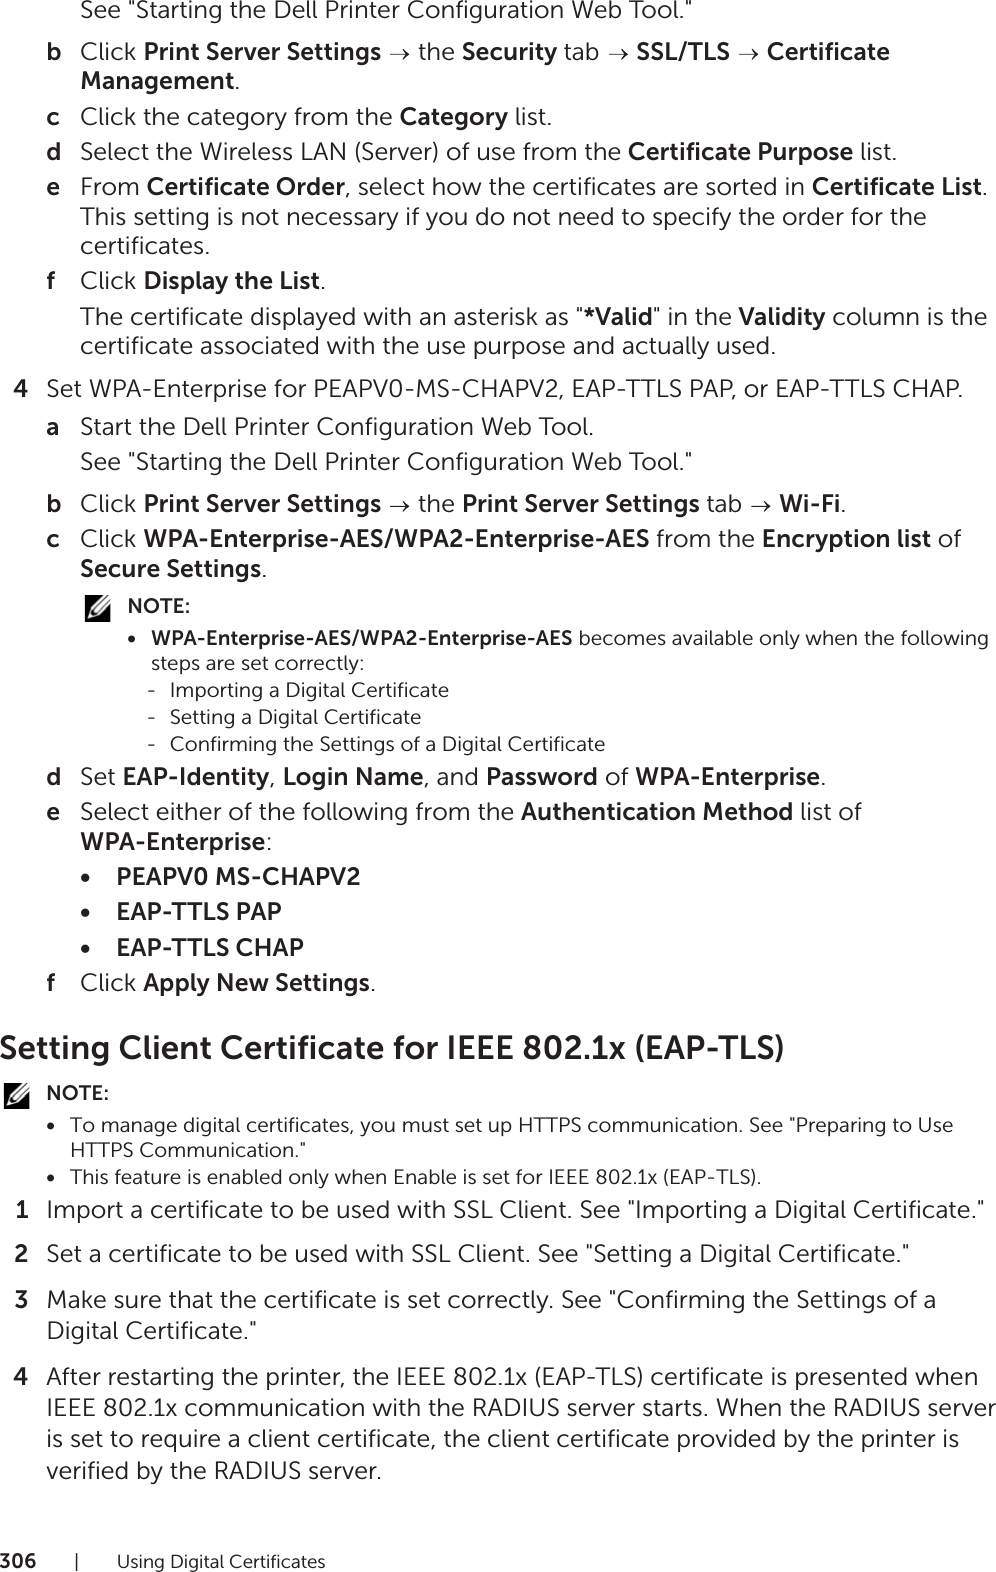 306| Using Digital CertificatesSee &quot;Starting the Dell Printer Configuration Web Tool.&quot;bClick Print Server Settings  the Security tab   SSL/TLS  Certificate Management.cClick the category from the Category list.dSelect the Wireless LAN (Server) of use from the Certificate Purpose list.eFrom Certificate Order, select how the certificates are sorted in Certificate List. This setting is not necessary if you do not need to specify the order for the certificates.fClick Display the List.The certificate displayed with an asterisk as &quot;*Valid&quot; in the Validity column is the certificate associated with the use purpose and actually used.4Set WPA-Enterprise for PEAPV0-MS-CHAPV2, EAP-TTLS PAP, or EAP-TTLS CHAP.aStart the Dell Printer Configuration Web Tool.See &quot;Starting the Dell Printer Configuration Web Tool.&quot;bClick Print Server Settings  the Print Server Settings tab   Wi-Fi.cClick WPA-Enterprise-AES/WPA2-Enterprise-AES from the Encryption list of Secure Settings.NOTE:• WPA-Enterprise-AES/WPA2-Enterprise-AES becomes available only when the following steps are set correctly:- Importing a Digital Certificate- Setting a Digital Certificate- Confirming the Settings of a Digital CertificatedSet EAP-Identity, Login Name, and Password of WPA-Enterprise.eSelect either of the following from the Authentication Method list of WPA-Enterprise:• PEAPV0 MS-CHAPV2•EAP-TTLS PAP•EAP-TTLS CHAPfClick Apply New Settings.Setting Client Certificate for IEEE 802.1x (EAP-TLS)NOTE:•To manage digital certificates, you must set up HTTPS communication. See &quot;Preparing to Use HTTPS Communication.&quot;•This feature is enabled only when Enable is set for IEEE 802.1x (EAP-TLS).1Import a certificate to be used with SSL Client. See &quot;Importing a Digital Certificate.&quot;2Set a certificate to be used with SSL Client. See &quot;Setting a Digital Certificate.&quot;3Make sure that the certificate is set correctly. See &quot;Confirming the Settings of a Digital Certificate.&quot;4After restarting the printer, the IEEE 802.1x (EAP-TLS) certificate is presented when IEEE 802.1x communication with the RADIUS server starts. When the RADIUS server is set to require a client certificate, the client certificate provided by the printer is verified by the RADIUS server.